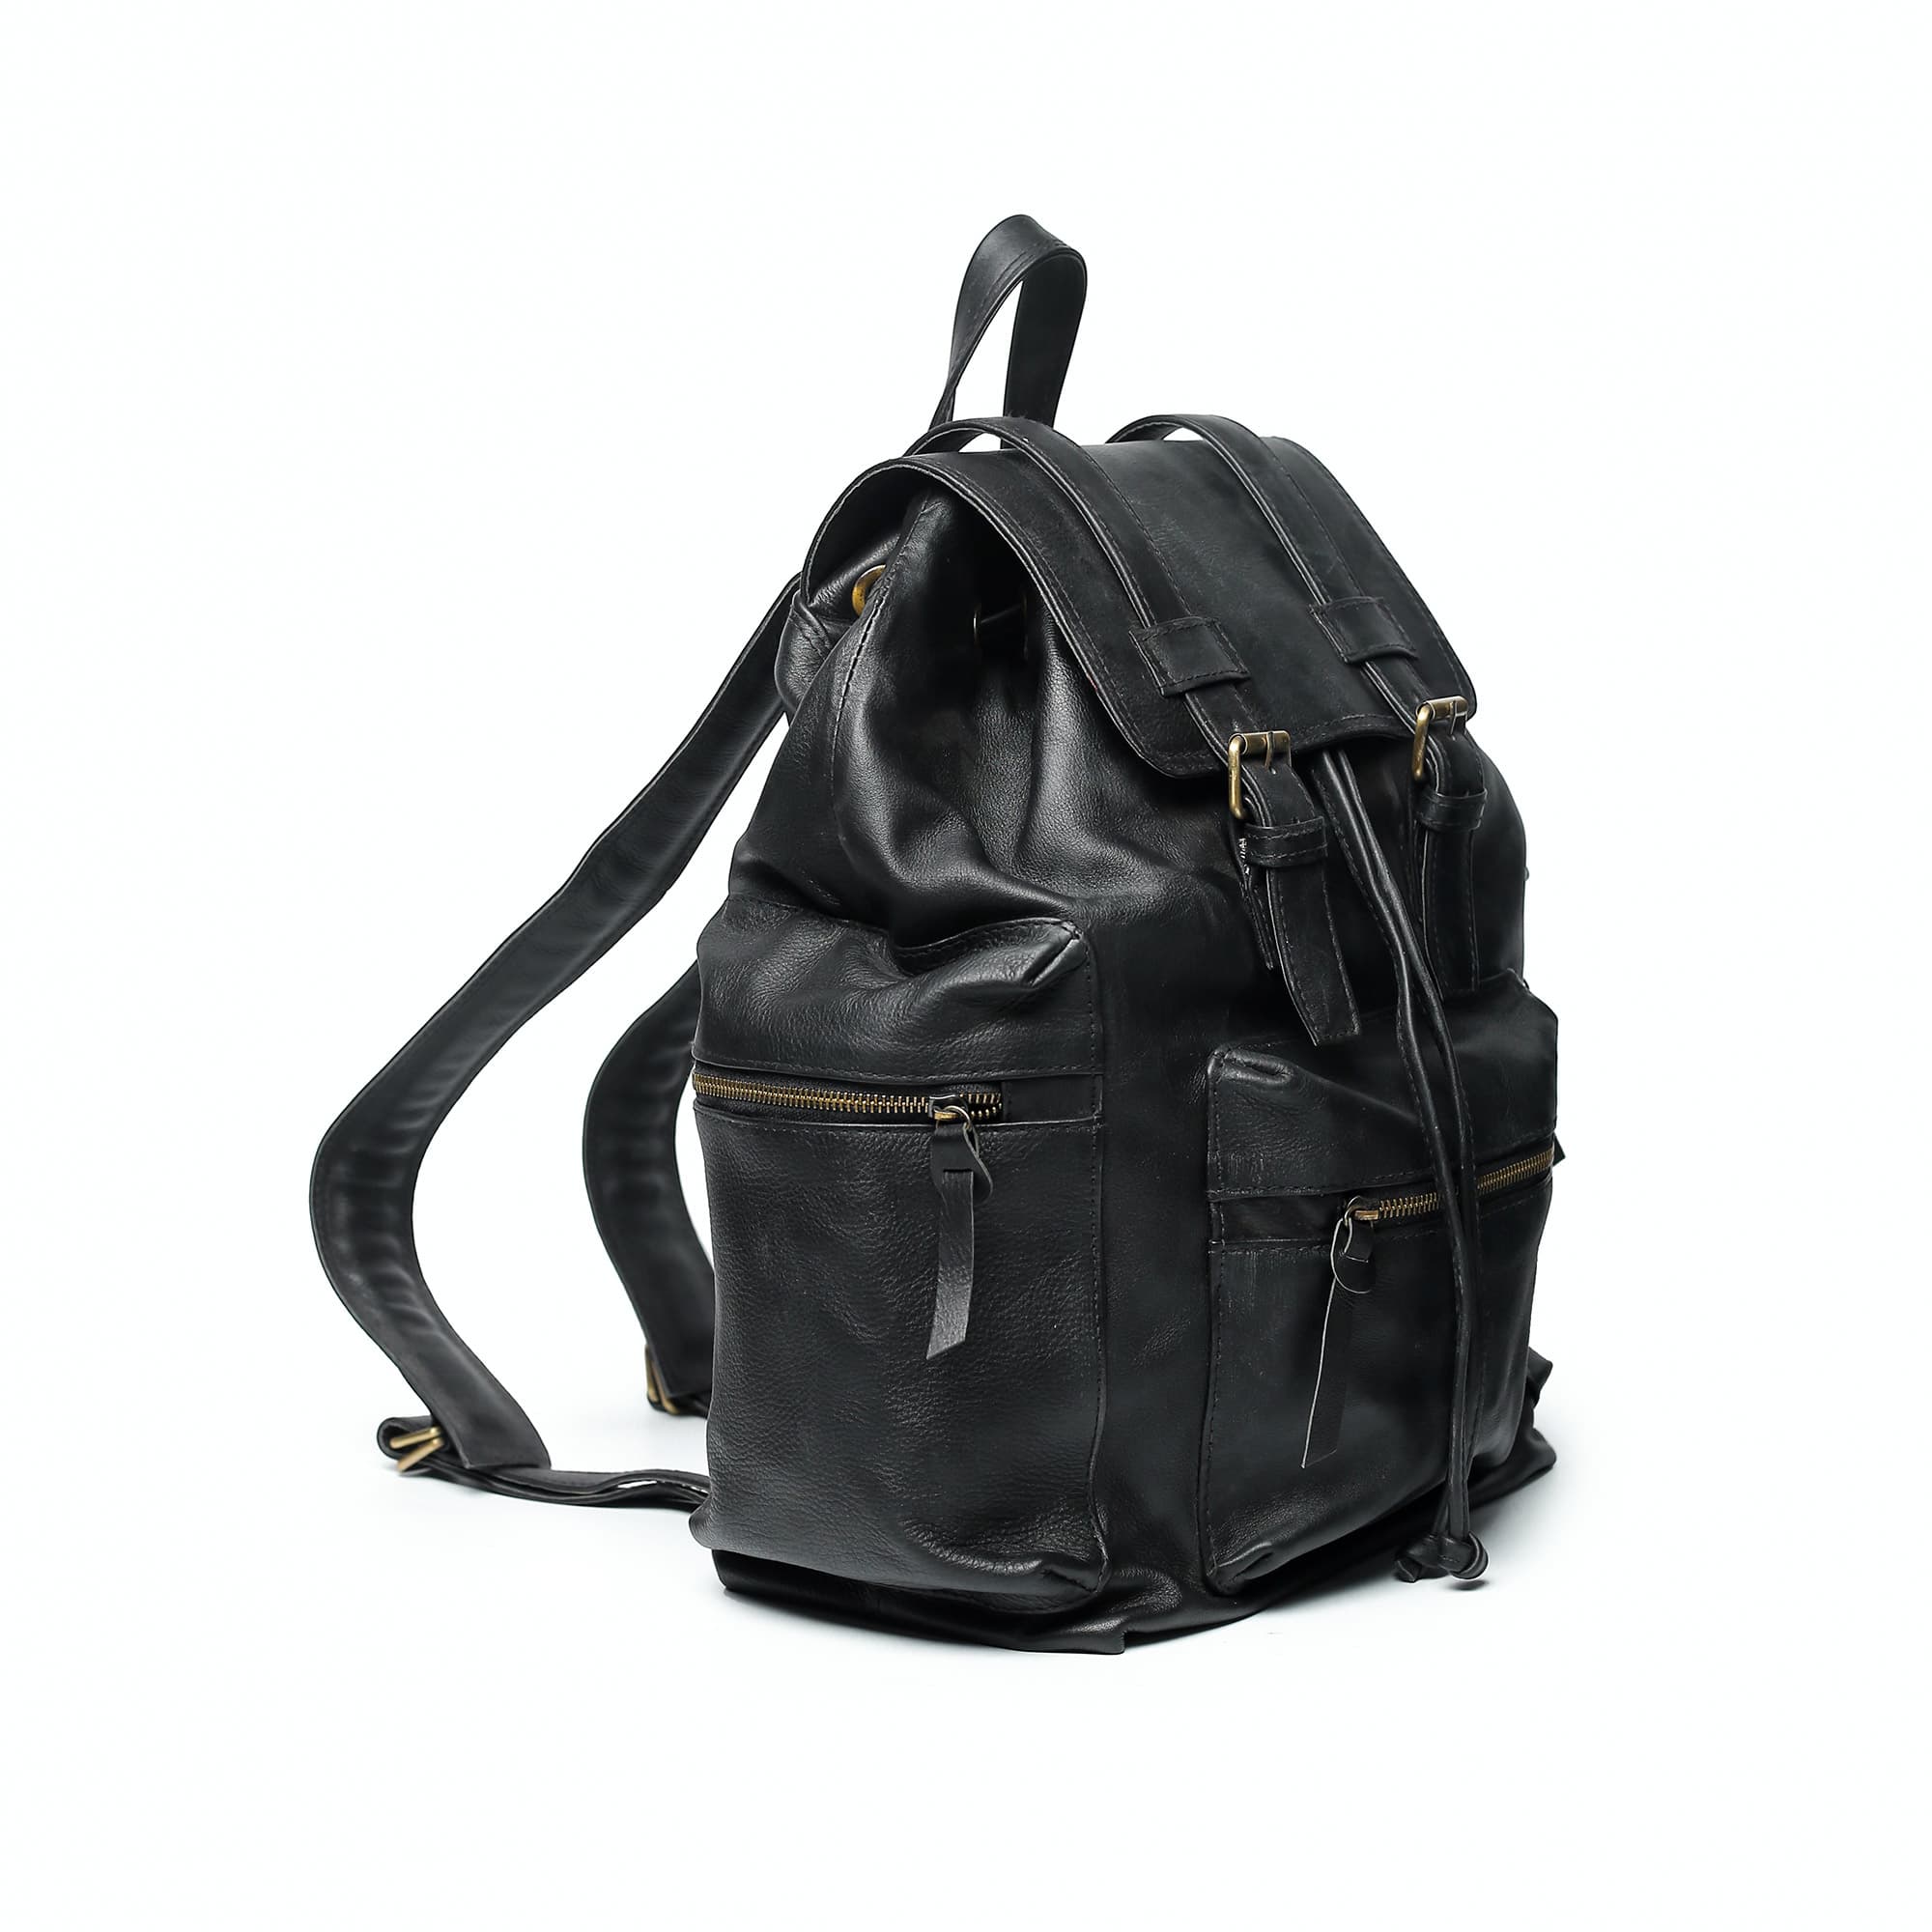 Leather Backpack in Pakistan: Traveling Bags, College TrendyBags